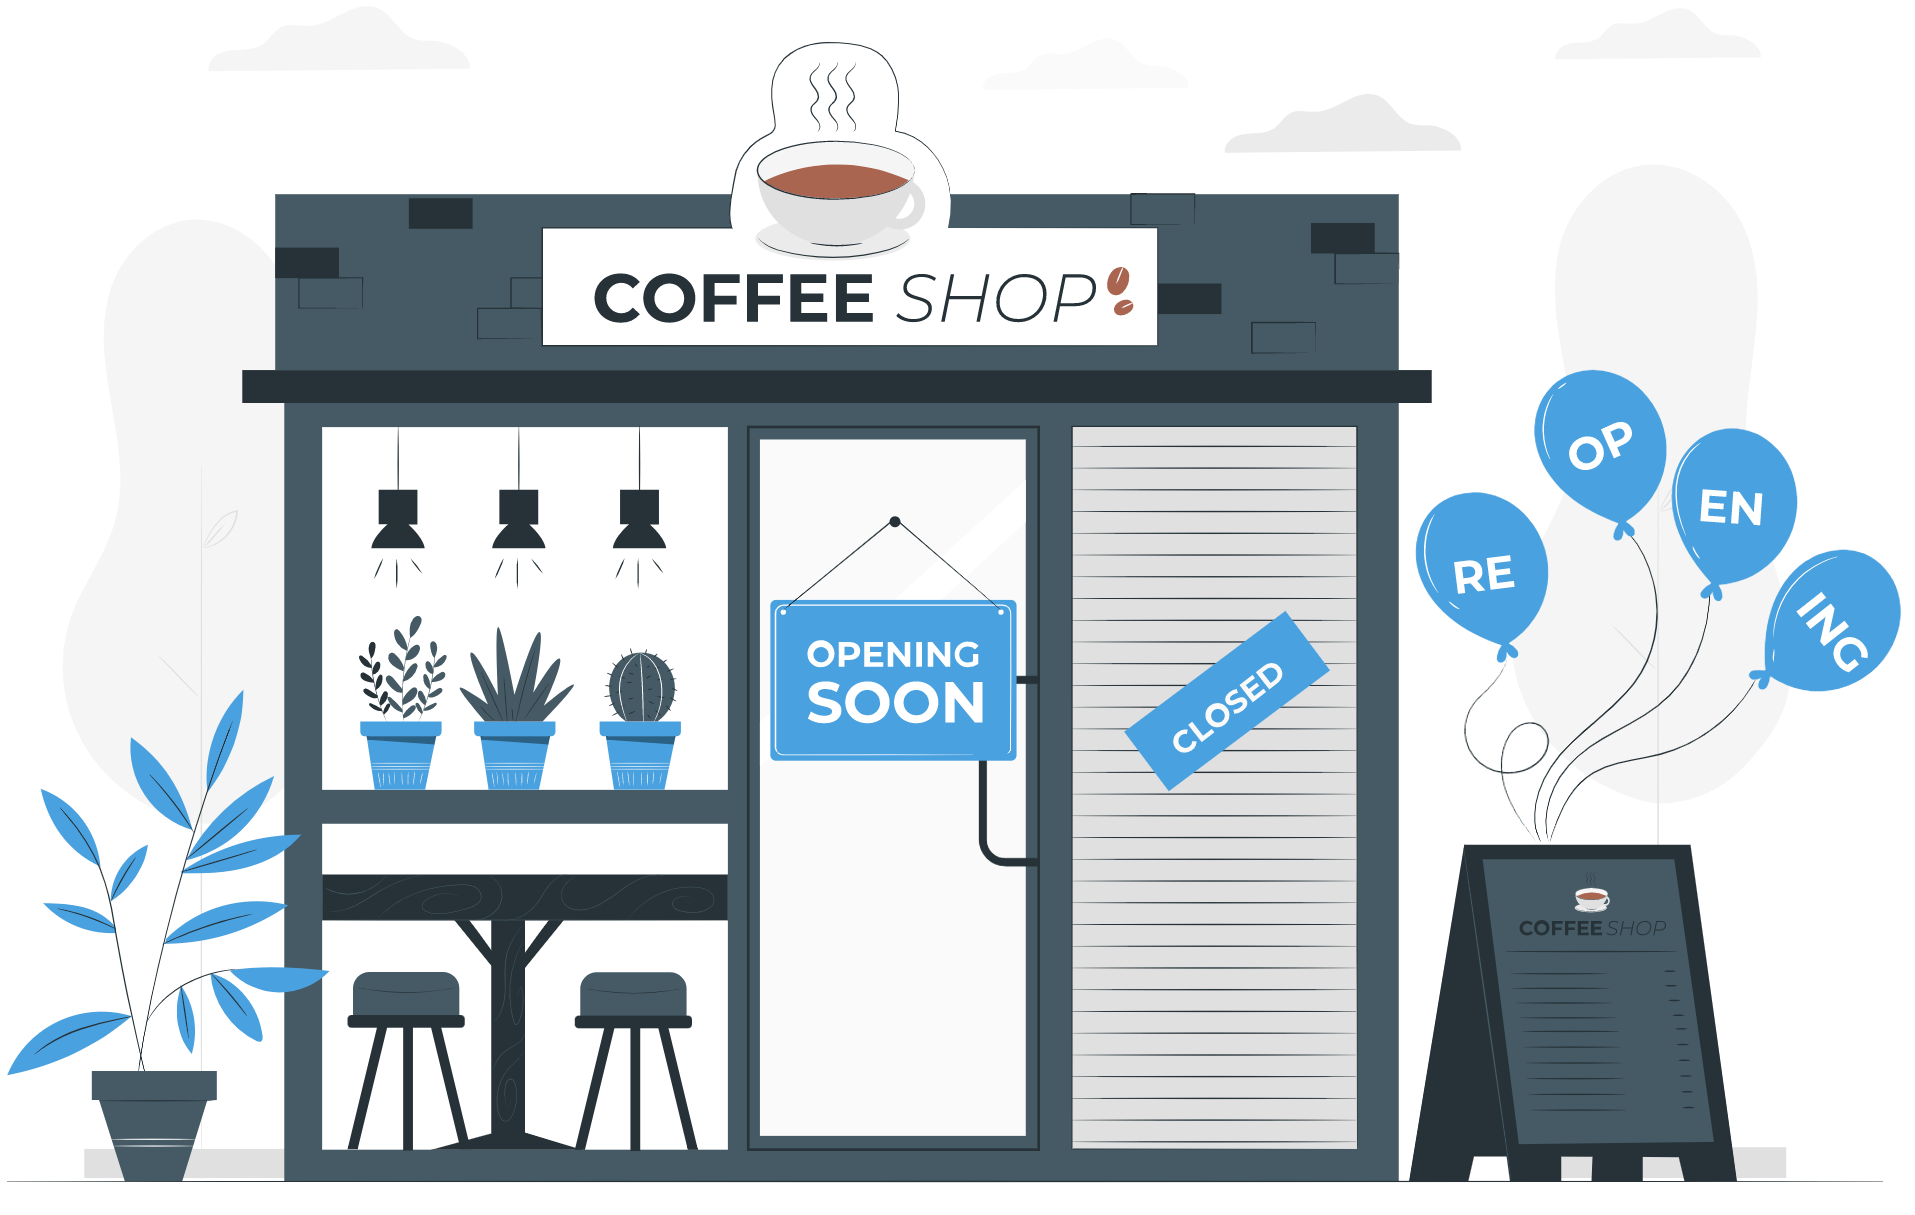 Cartoon coffee shop with opening soon signs and ballons